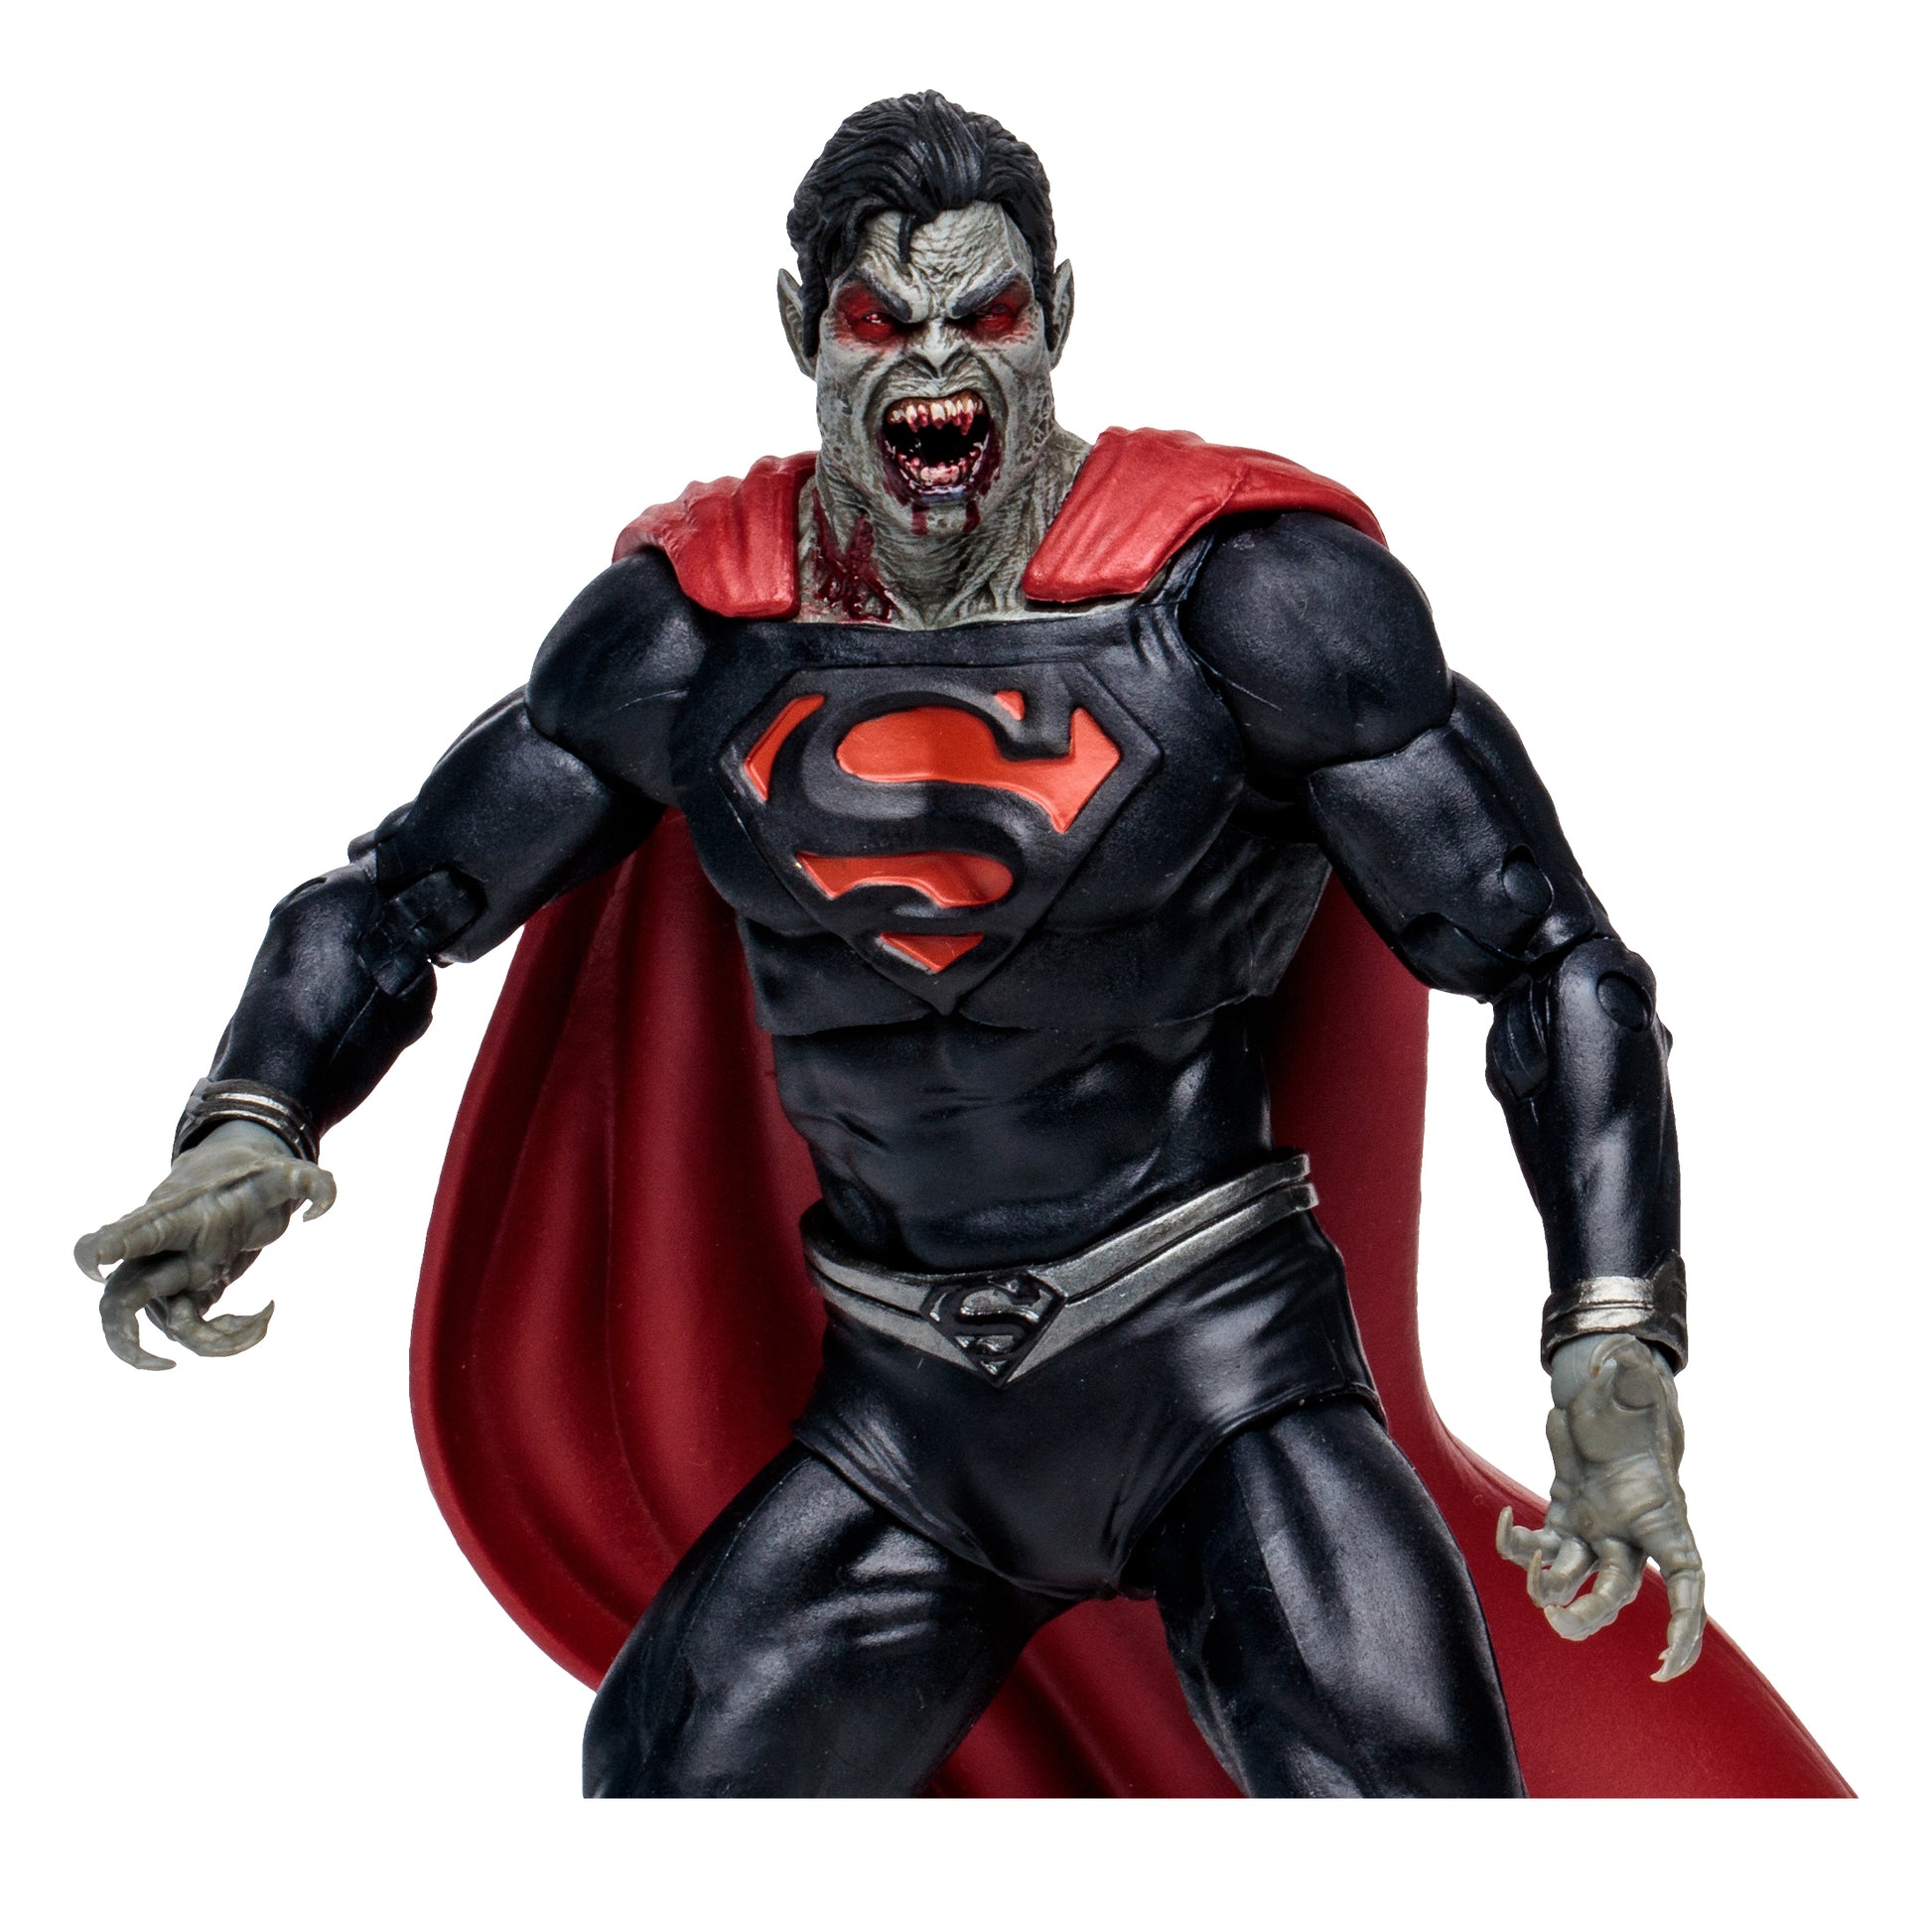 DC Multiverse Vampire Superman (DC vs.Vampires) Gold Label 7-Inch Action Figure close up look - Heretoserveyou